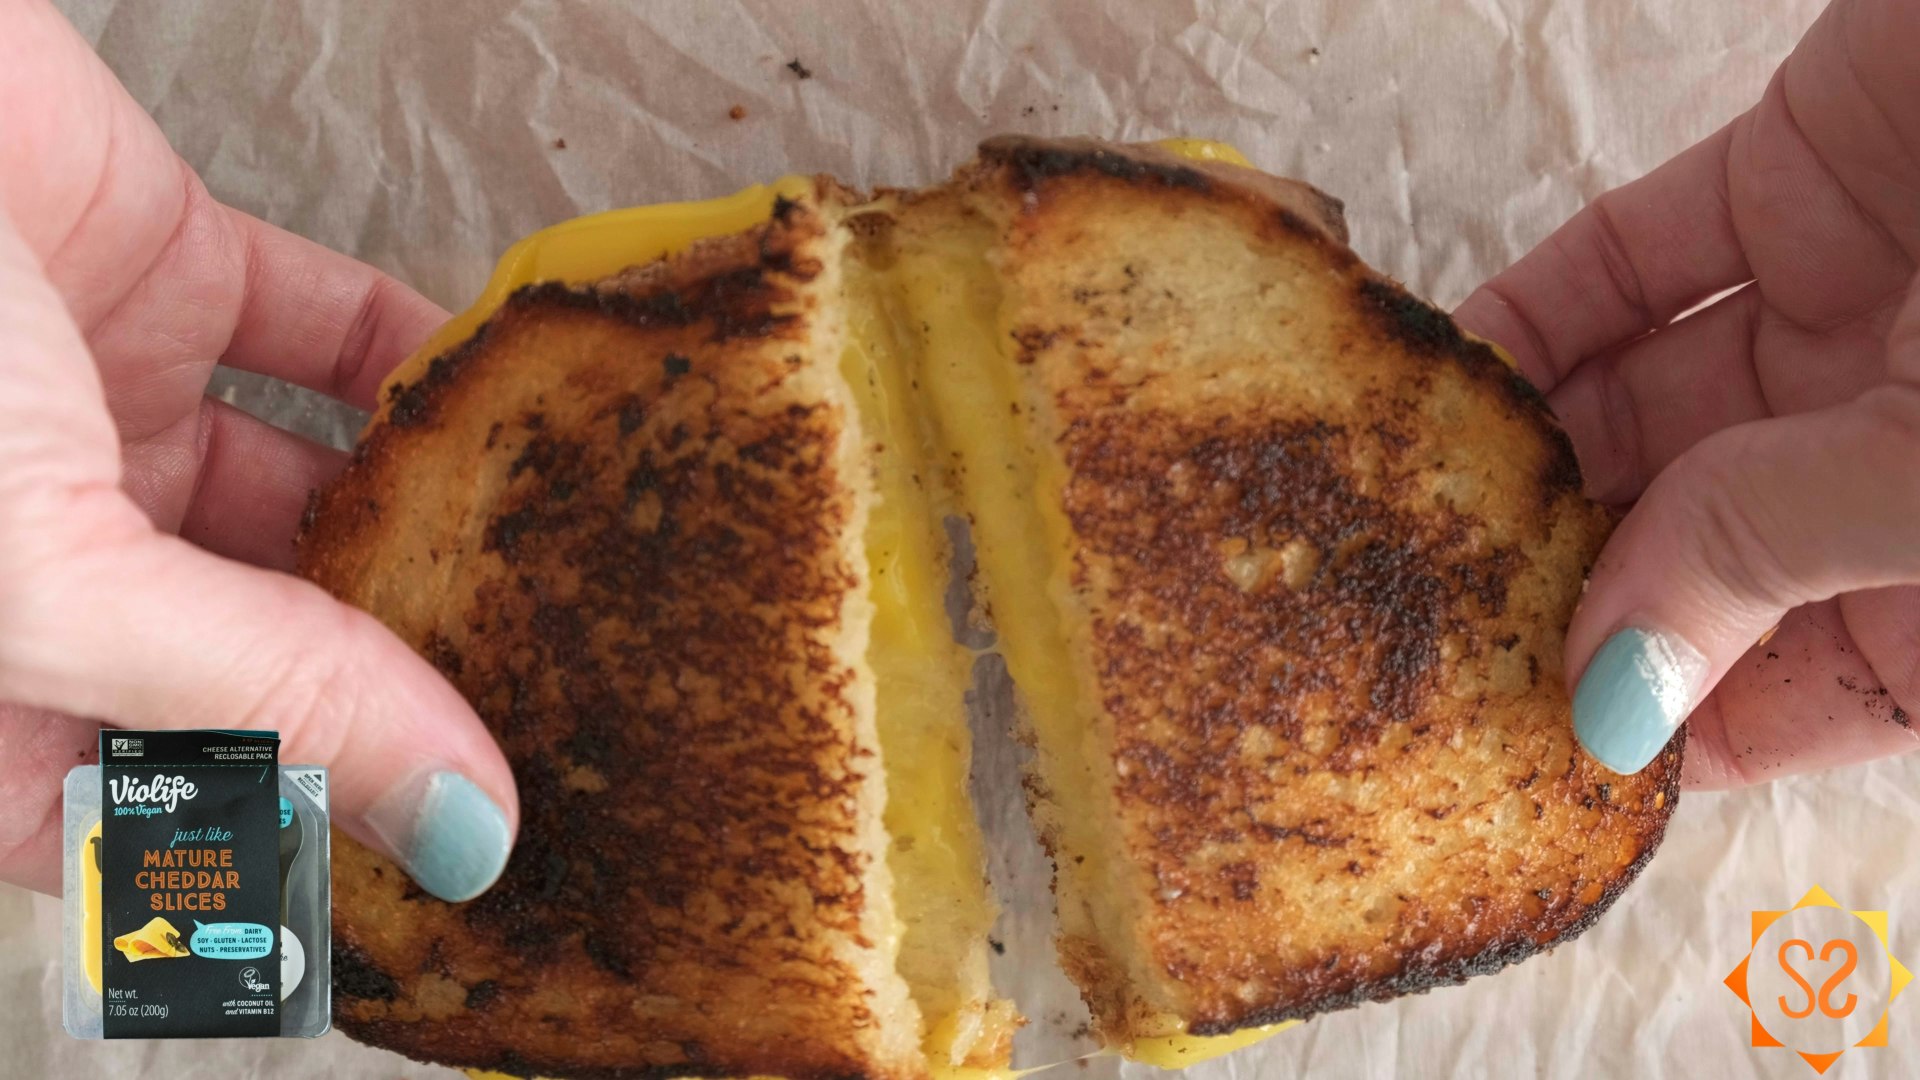 Two hands pulling apart a grilled cheese sandwich made with Violife Mature Cheddar